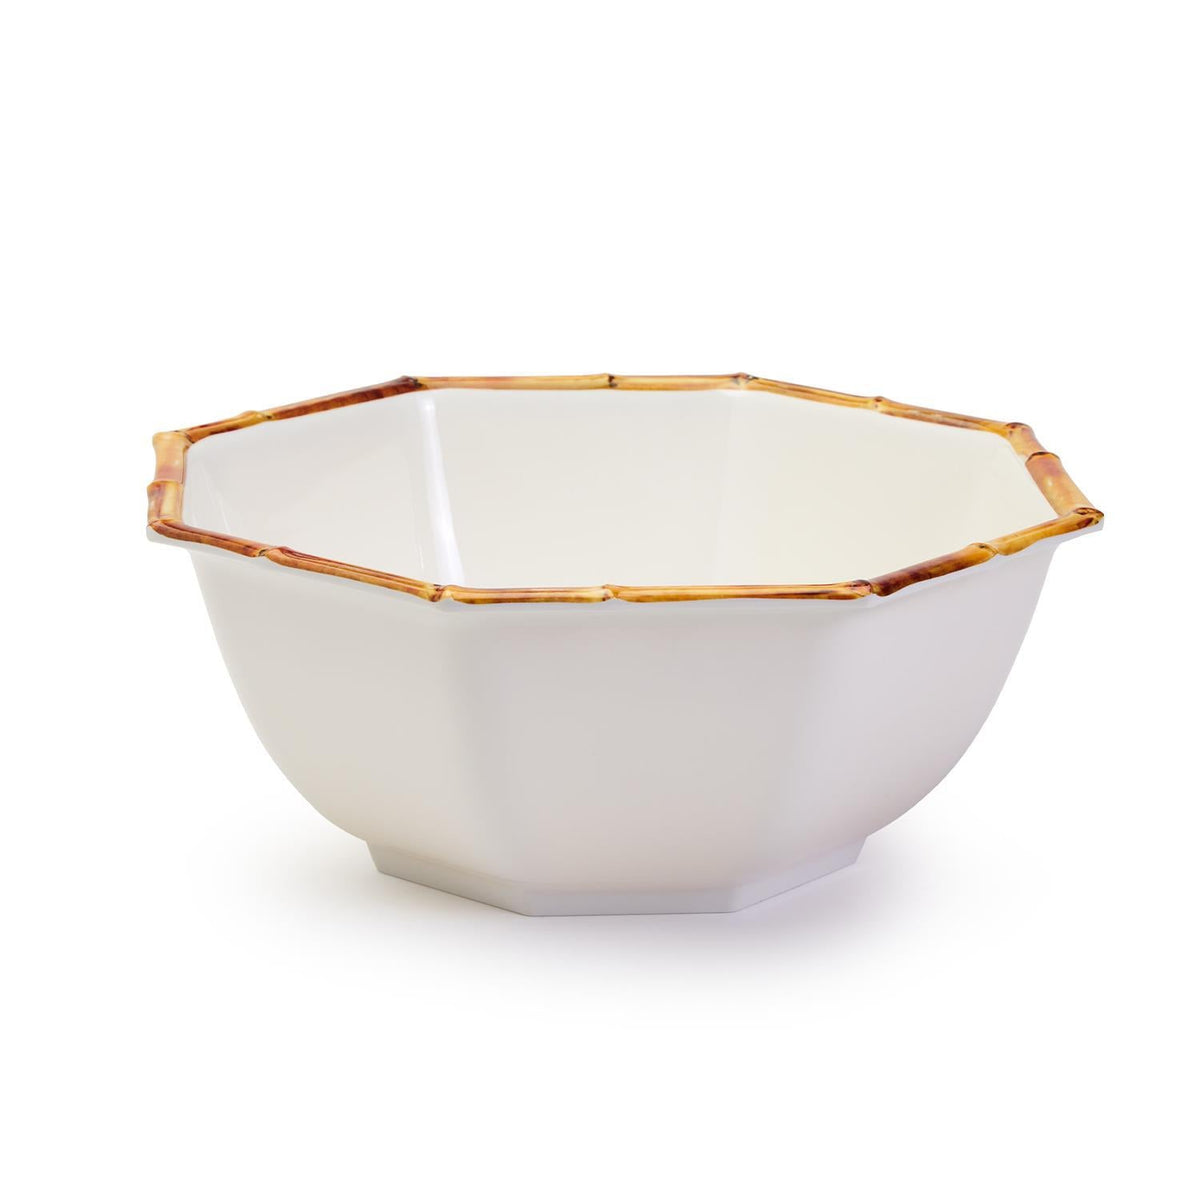 Bamboo Octagonal Serving Bowl - The Preppy Bunny